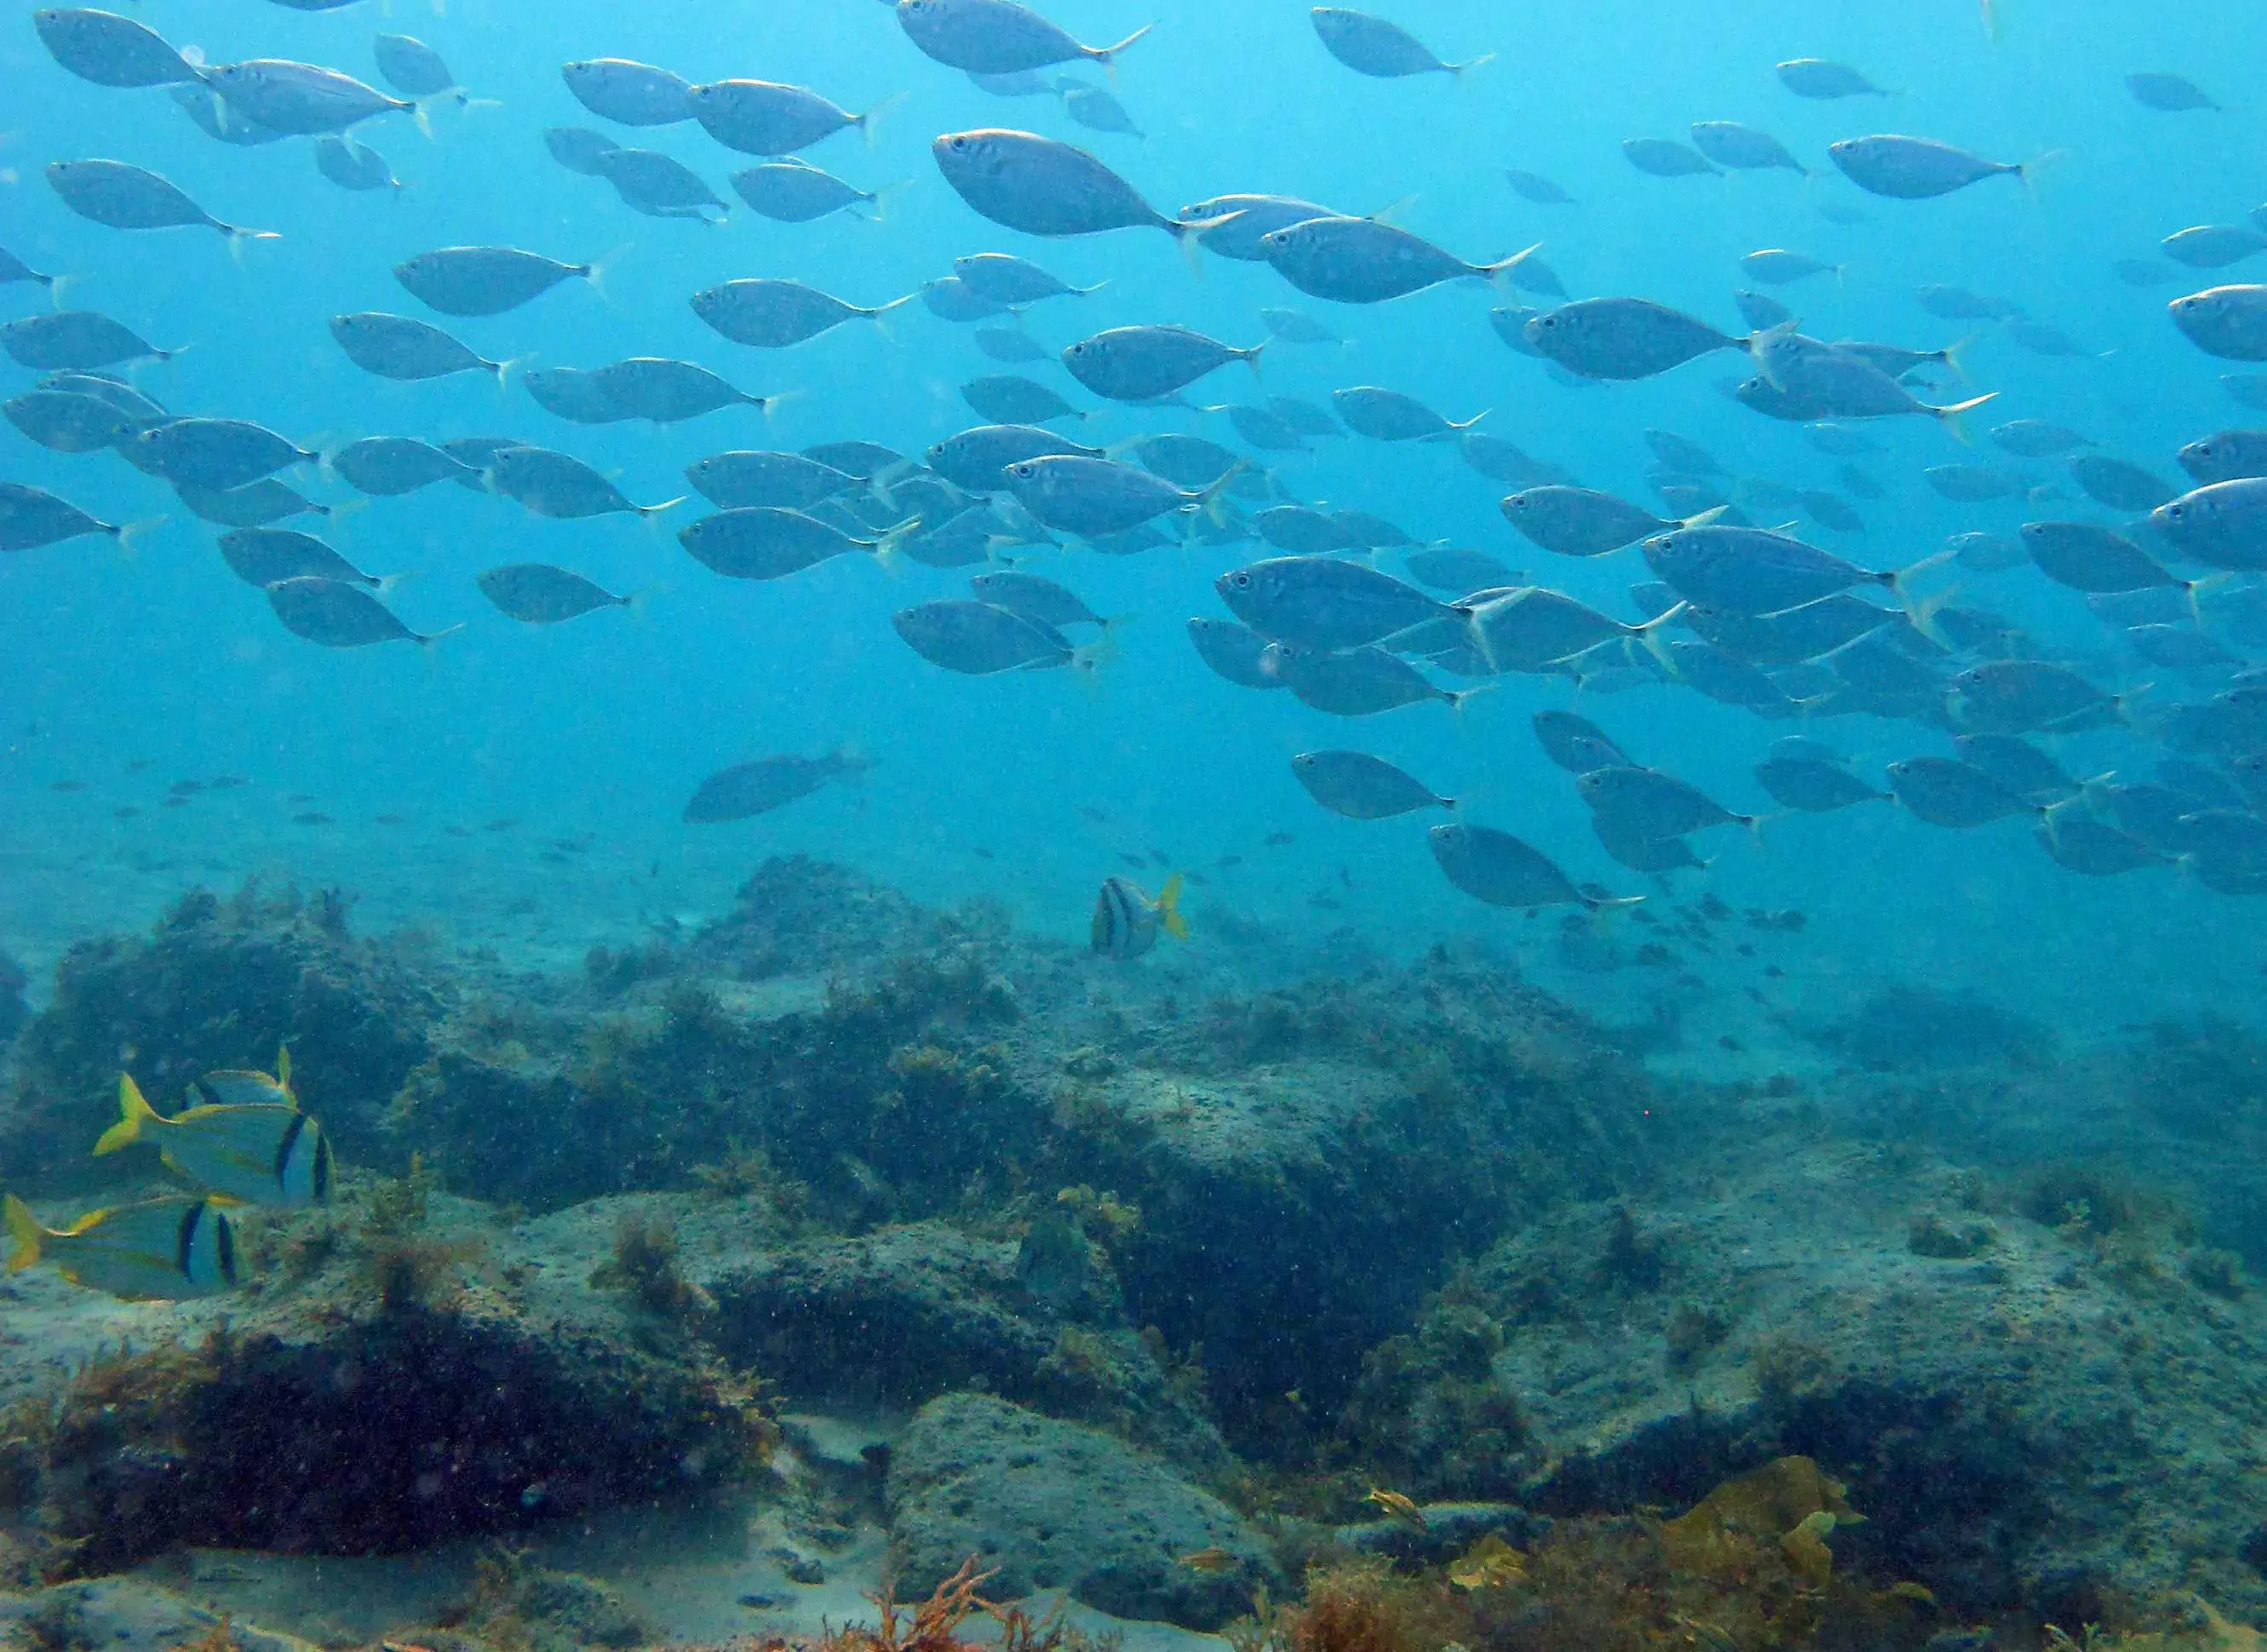 A school of fish swimming above a coral reef